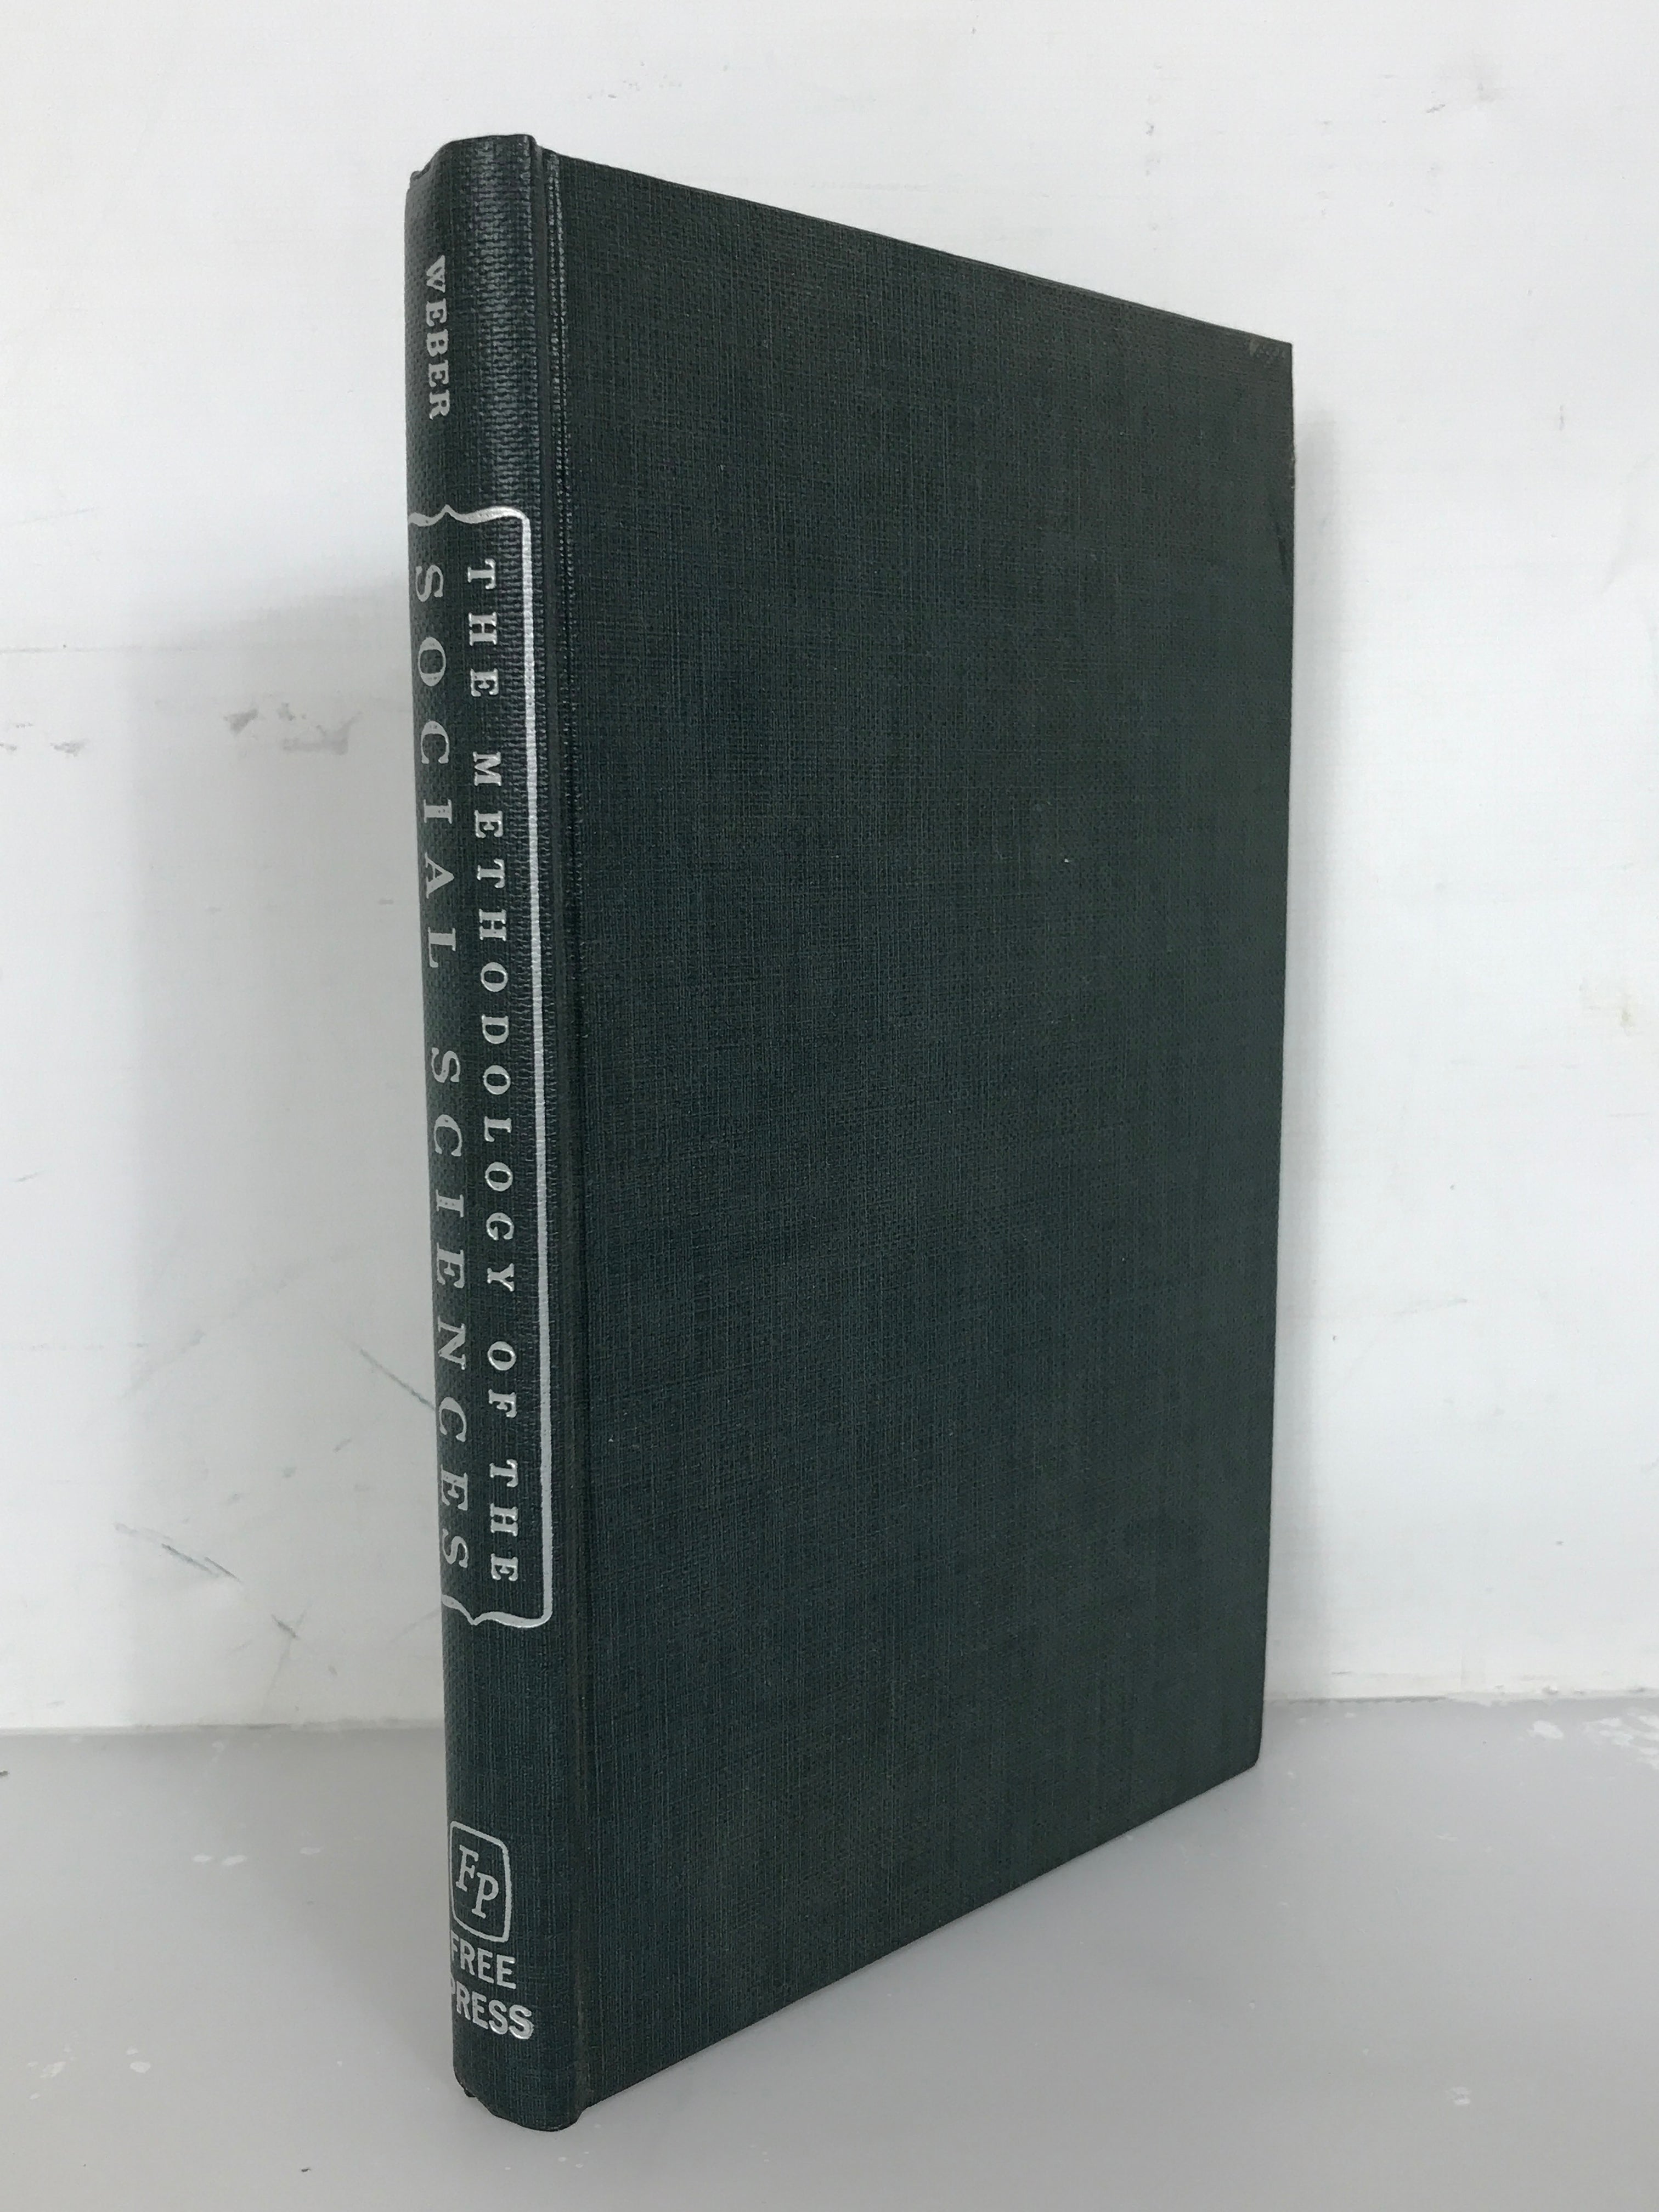 Vintage The Methodology of the Social Sciences by Max Weber 1949 HC